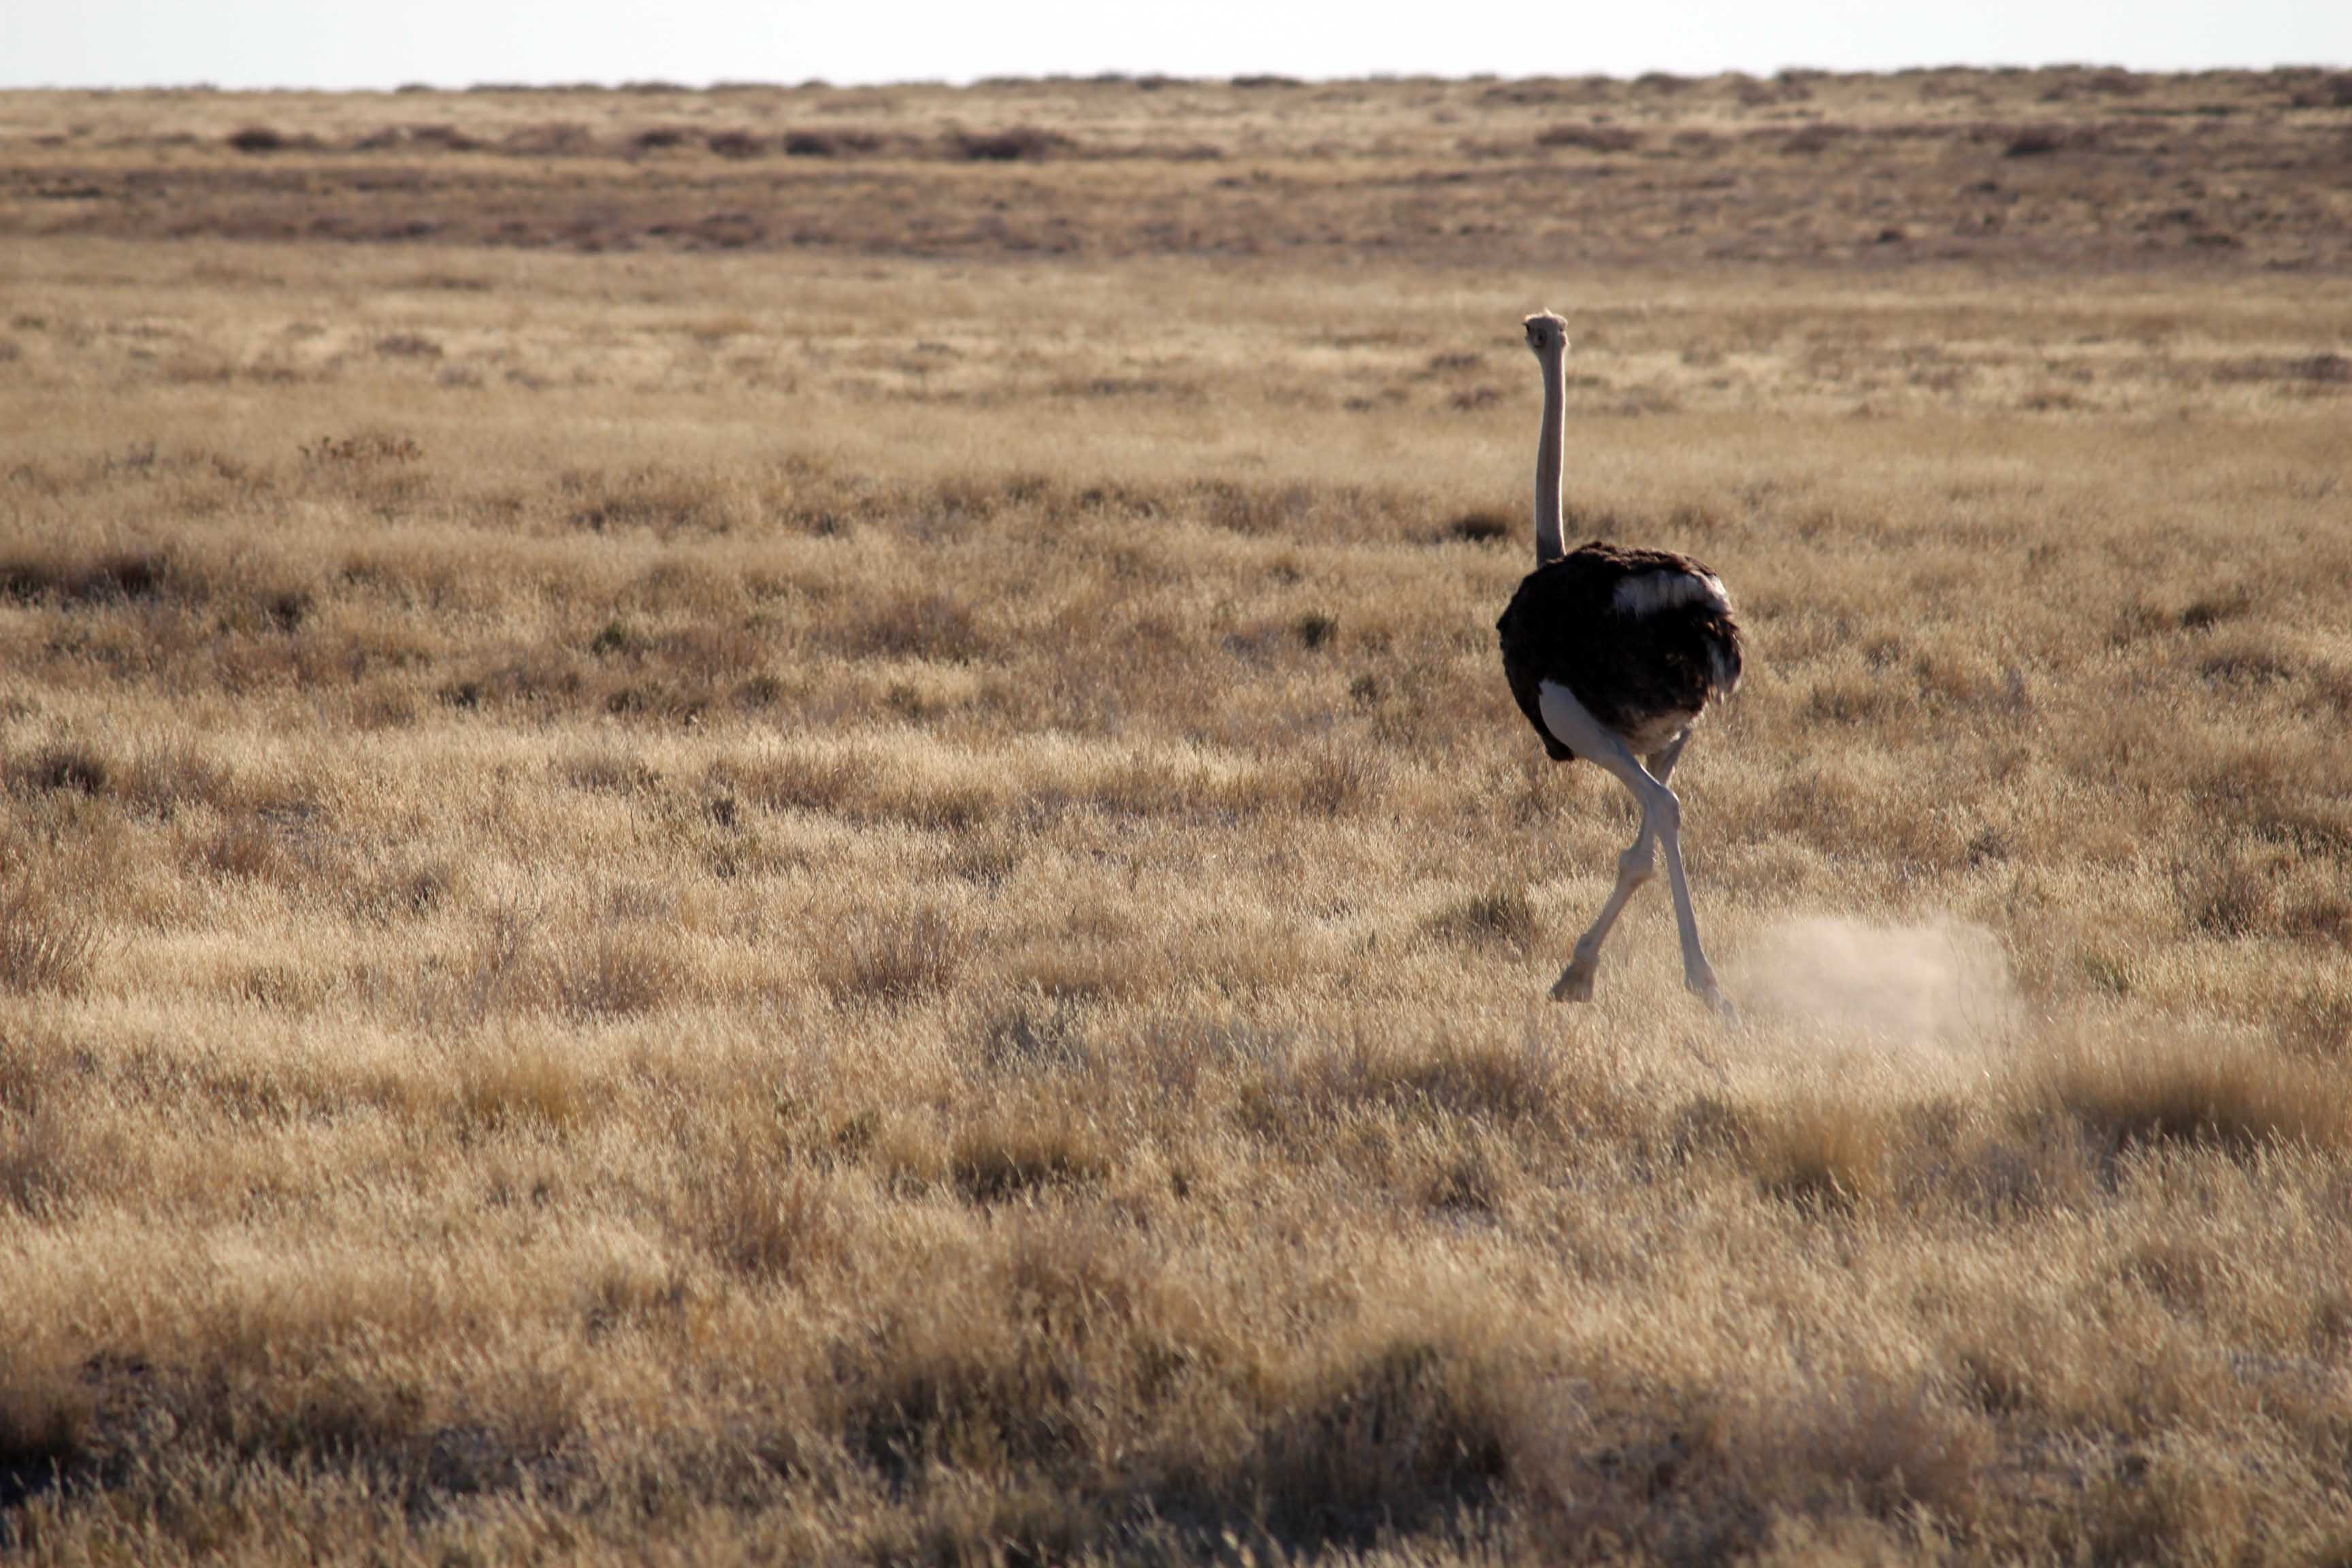 Run ostrich run! (Just by the side of the road as we drove). Photo/A.Griffin